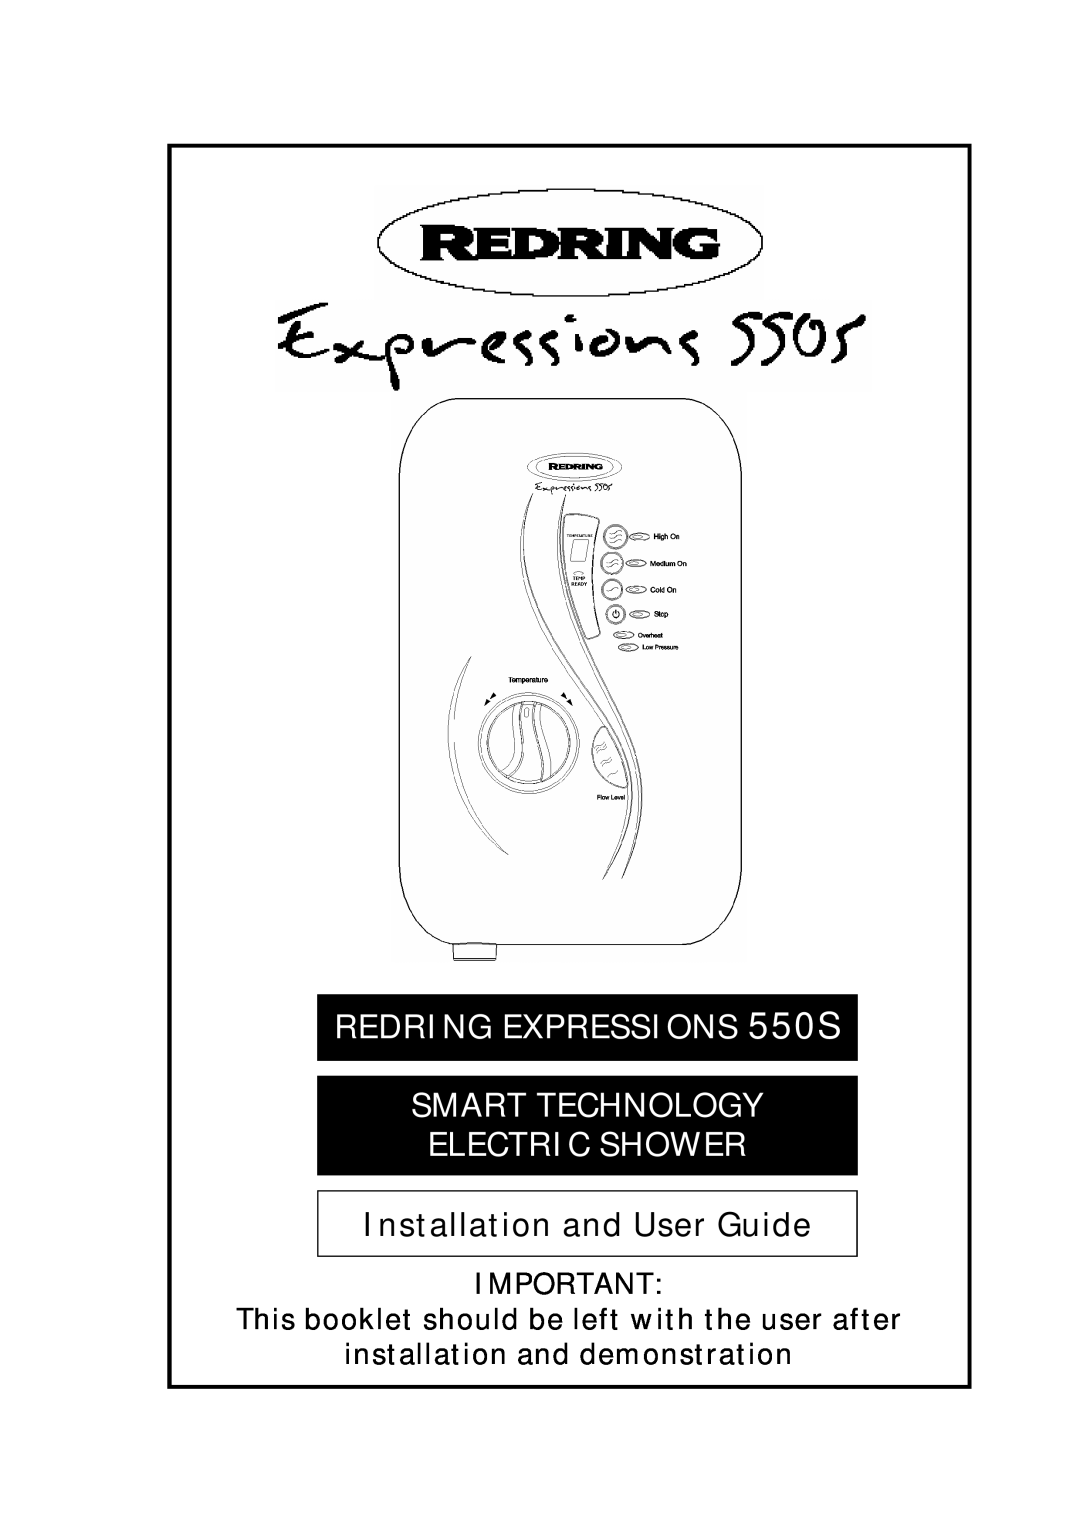 Redring manual REDRING EXPRESSIONS 550S SMART TECHNOLOGY, Electric Shower, Installation and User Guide 